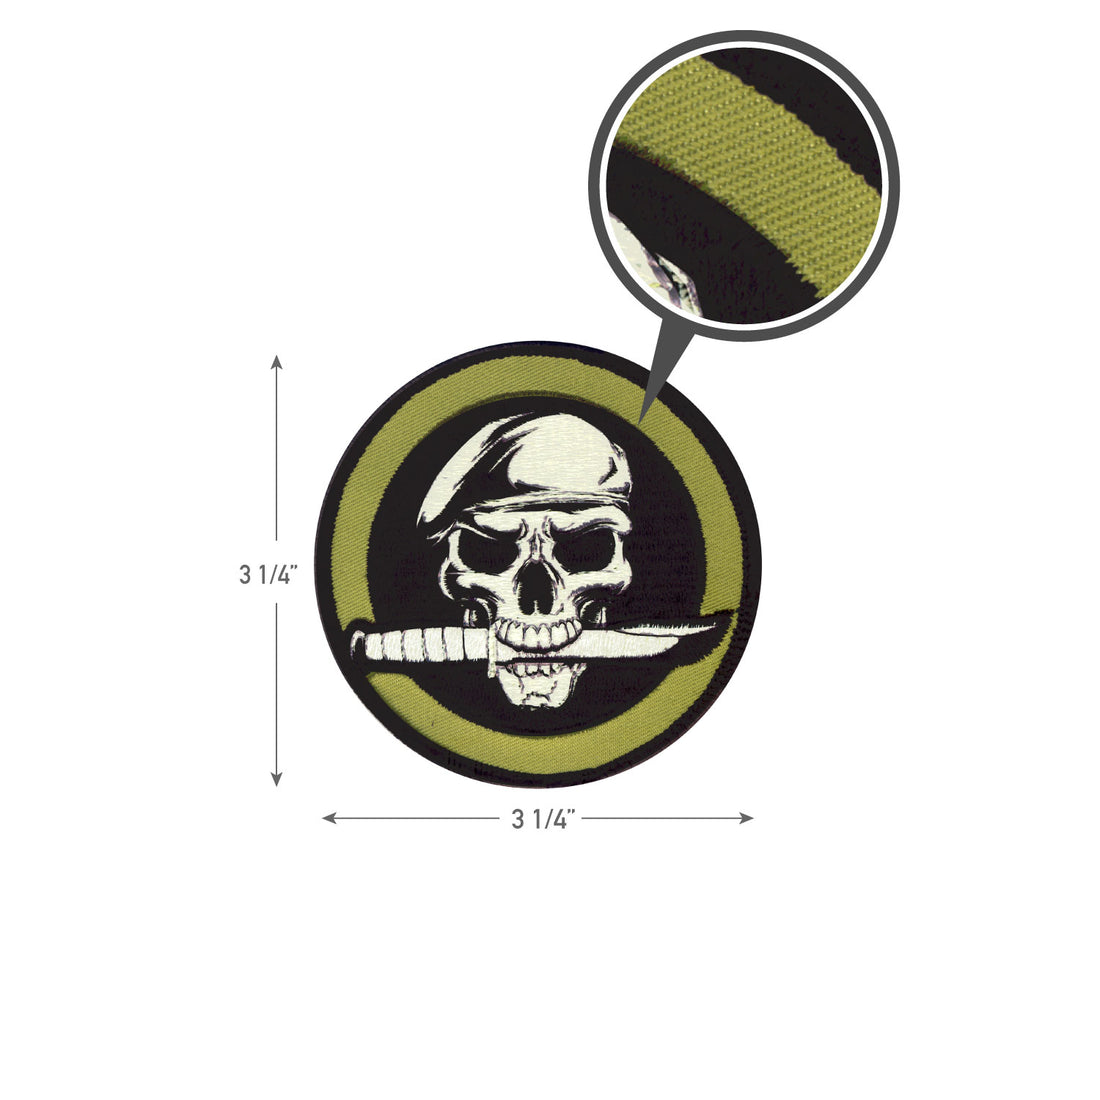 72194  ROTHCO MILITARY SKULL / KNIFE  PATCH W/HOOK BACK